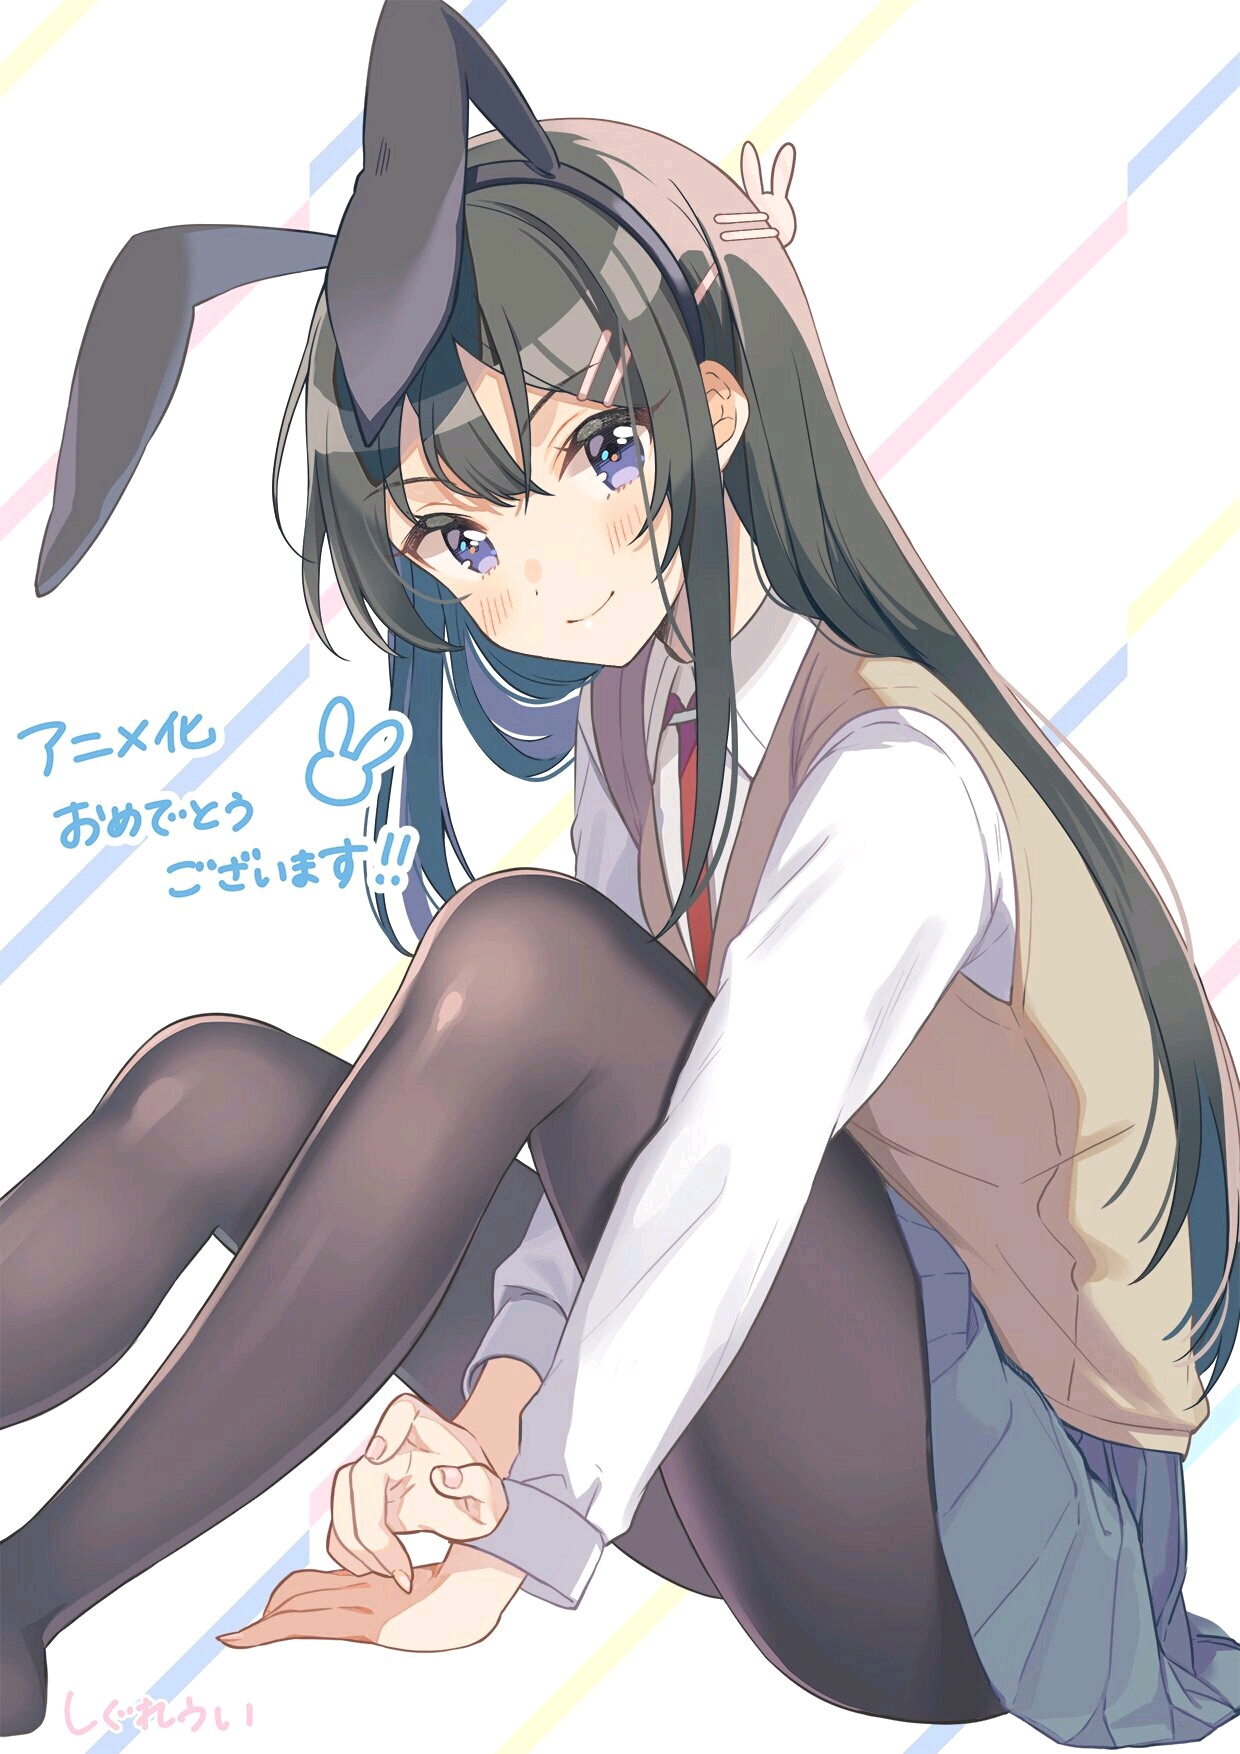 Rascal does not dream of Bunny girl senpai anime review by OBDURATE ...